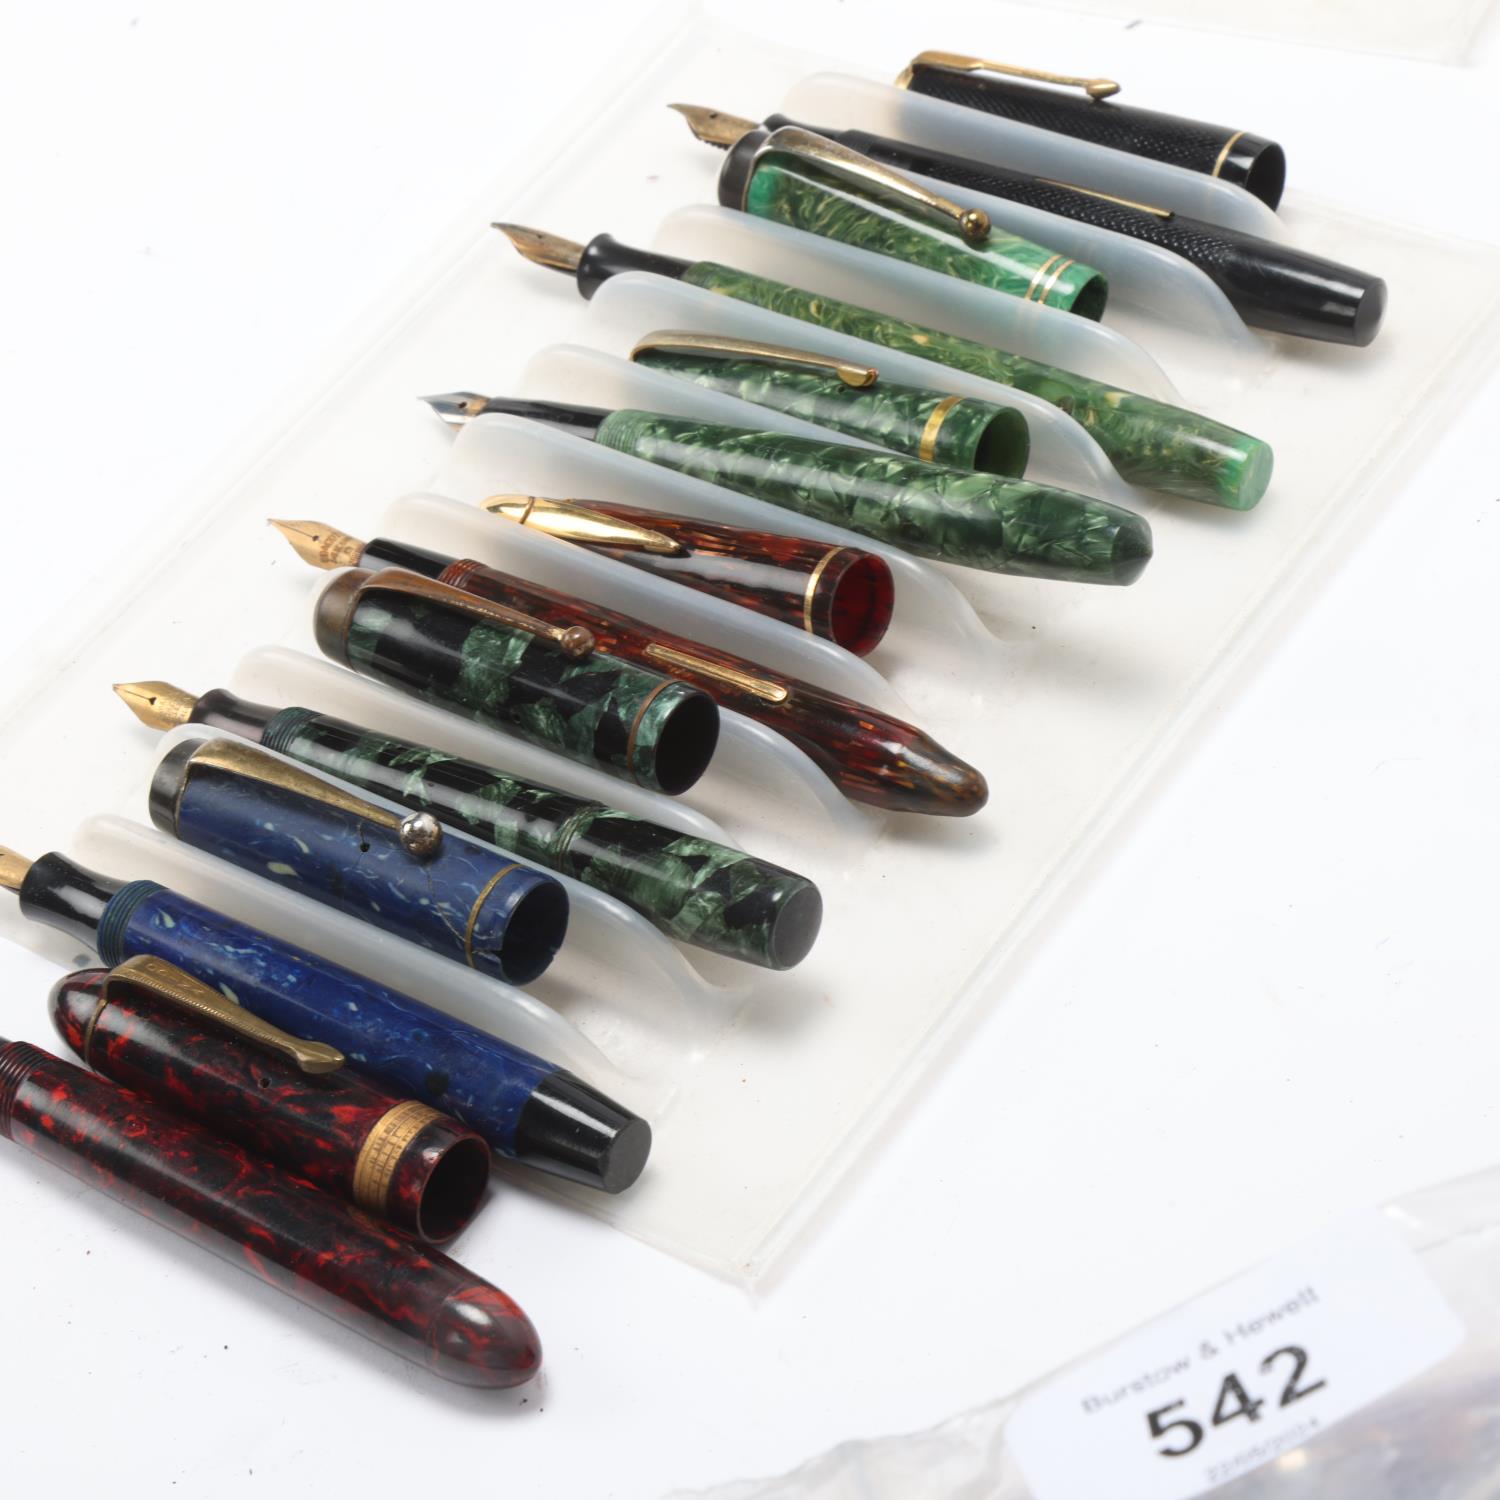 7 vintage fountain pens mid 20th century, including The Nova, 3 x National Security, Ritewell, - Image 4 of 4